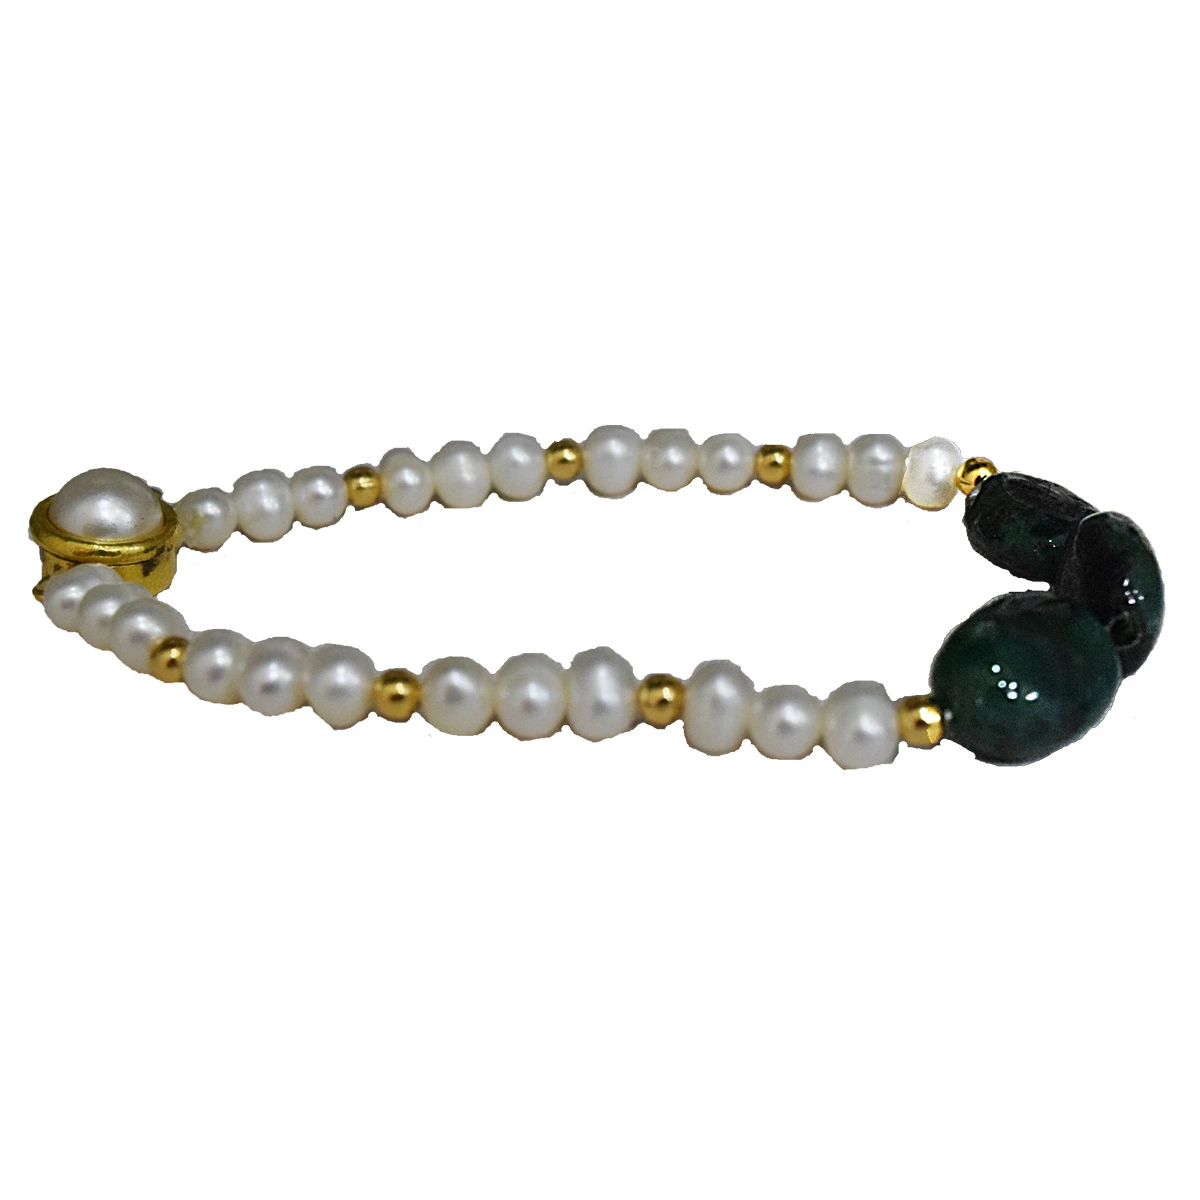 3 Big Real Green Oval Emerald, Freshwater Pearl & Gold Plated Bracelet for Women (SB56)